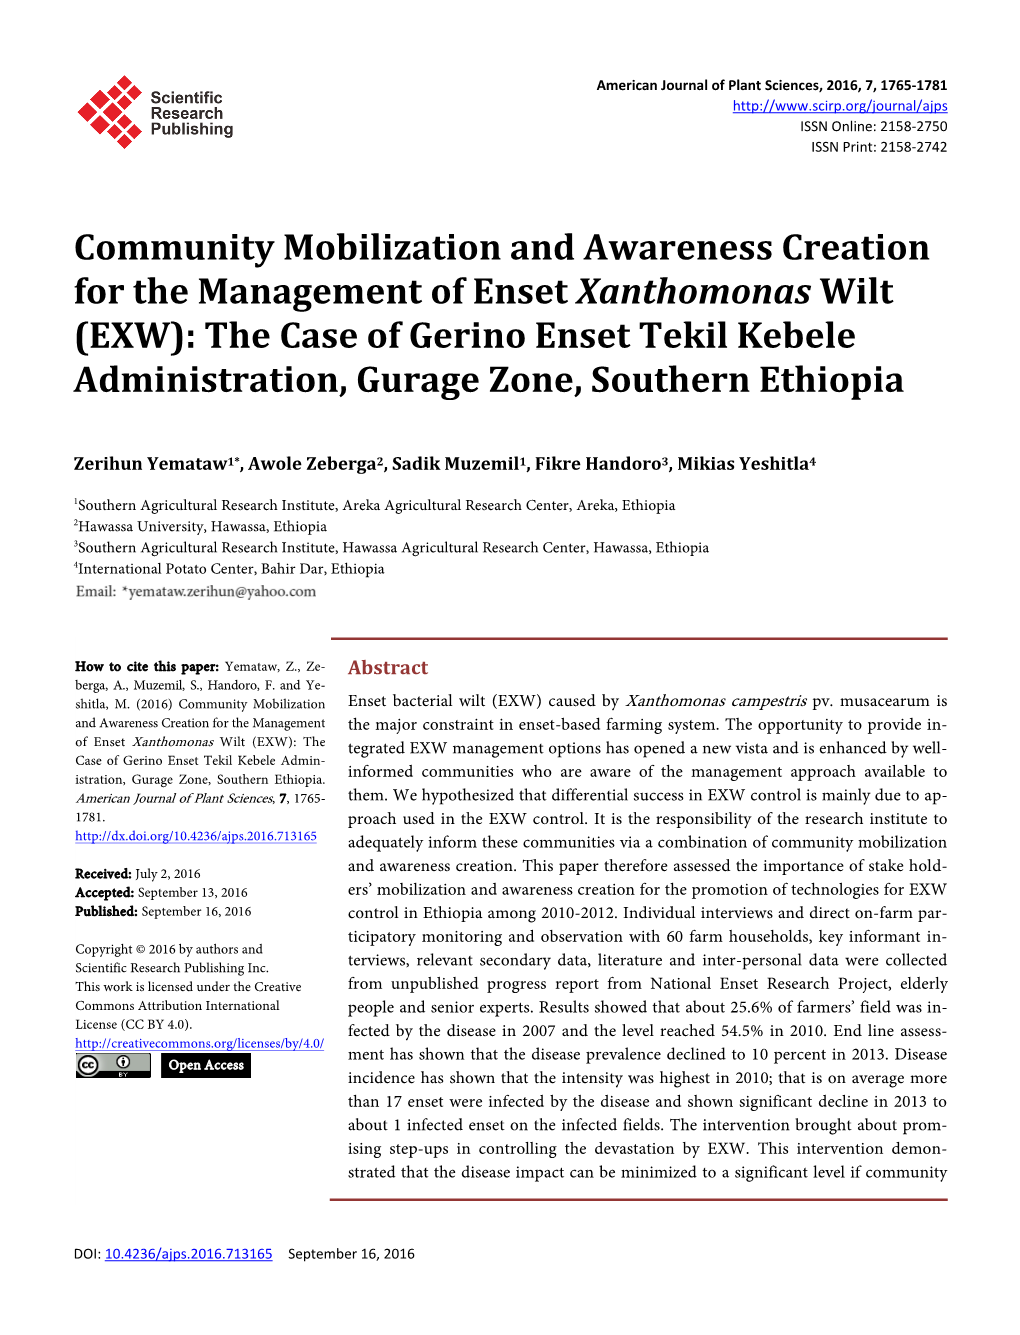 Community Mobilization and Awareness Creation for the Management of Enset Xanthomonas Wilt